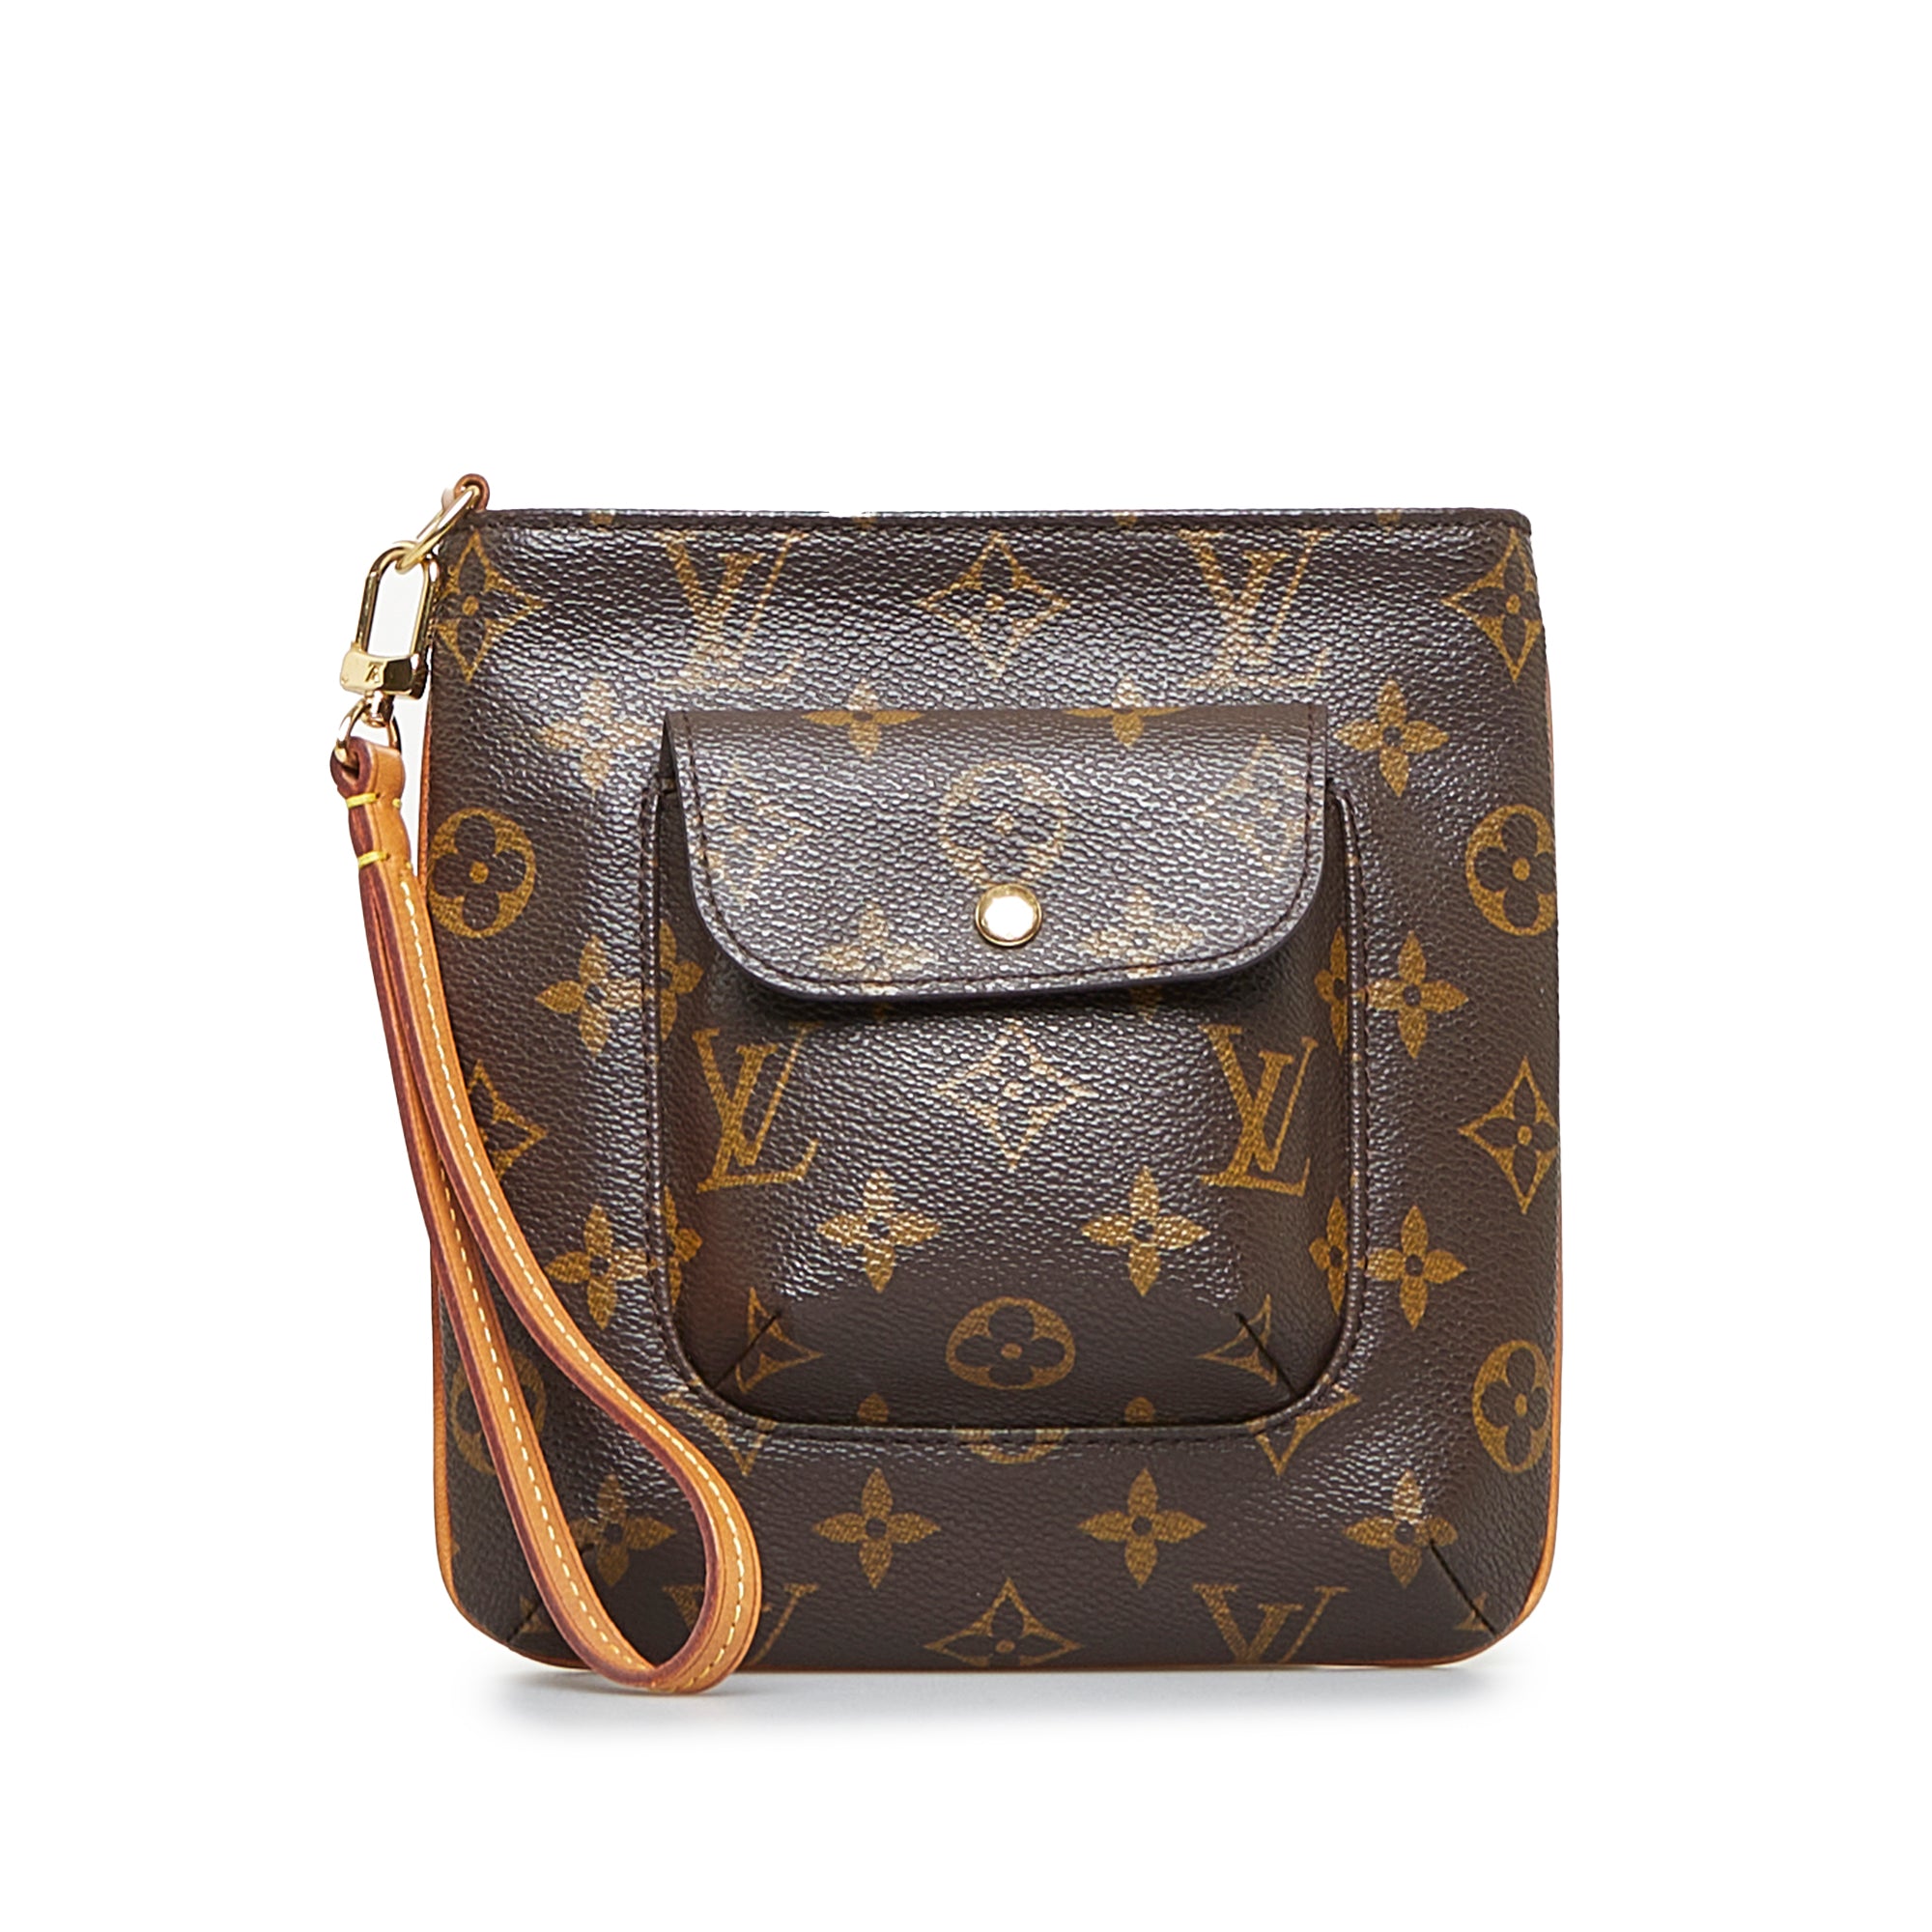 Louis Vuitton - Authenticated Partition Handbag - Leather Brown for Women, Very Good Condition